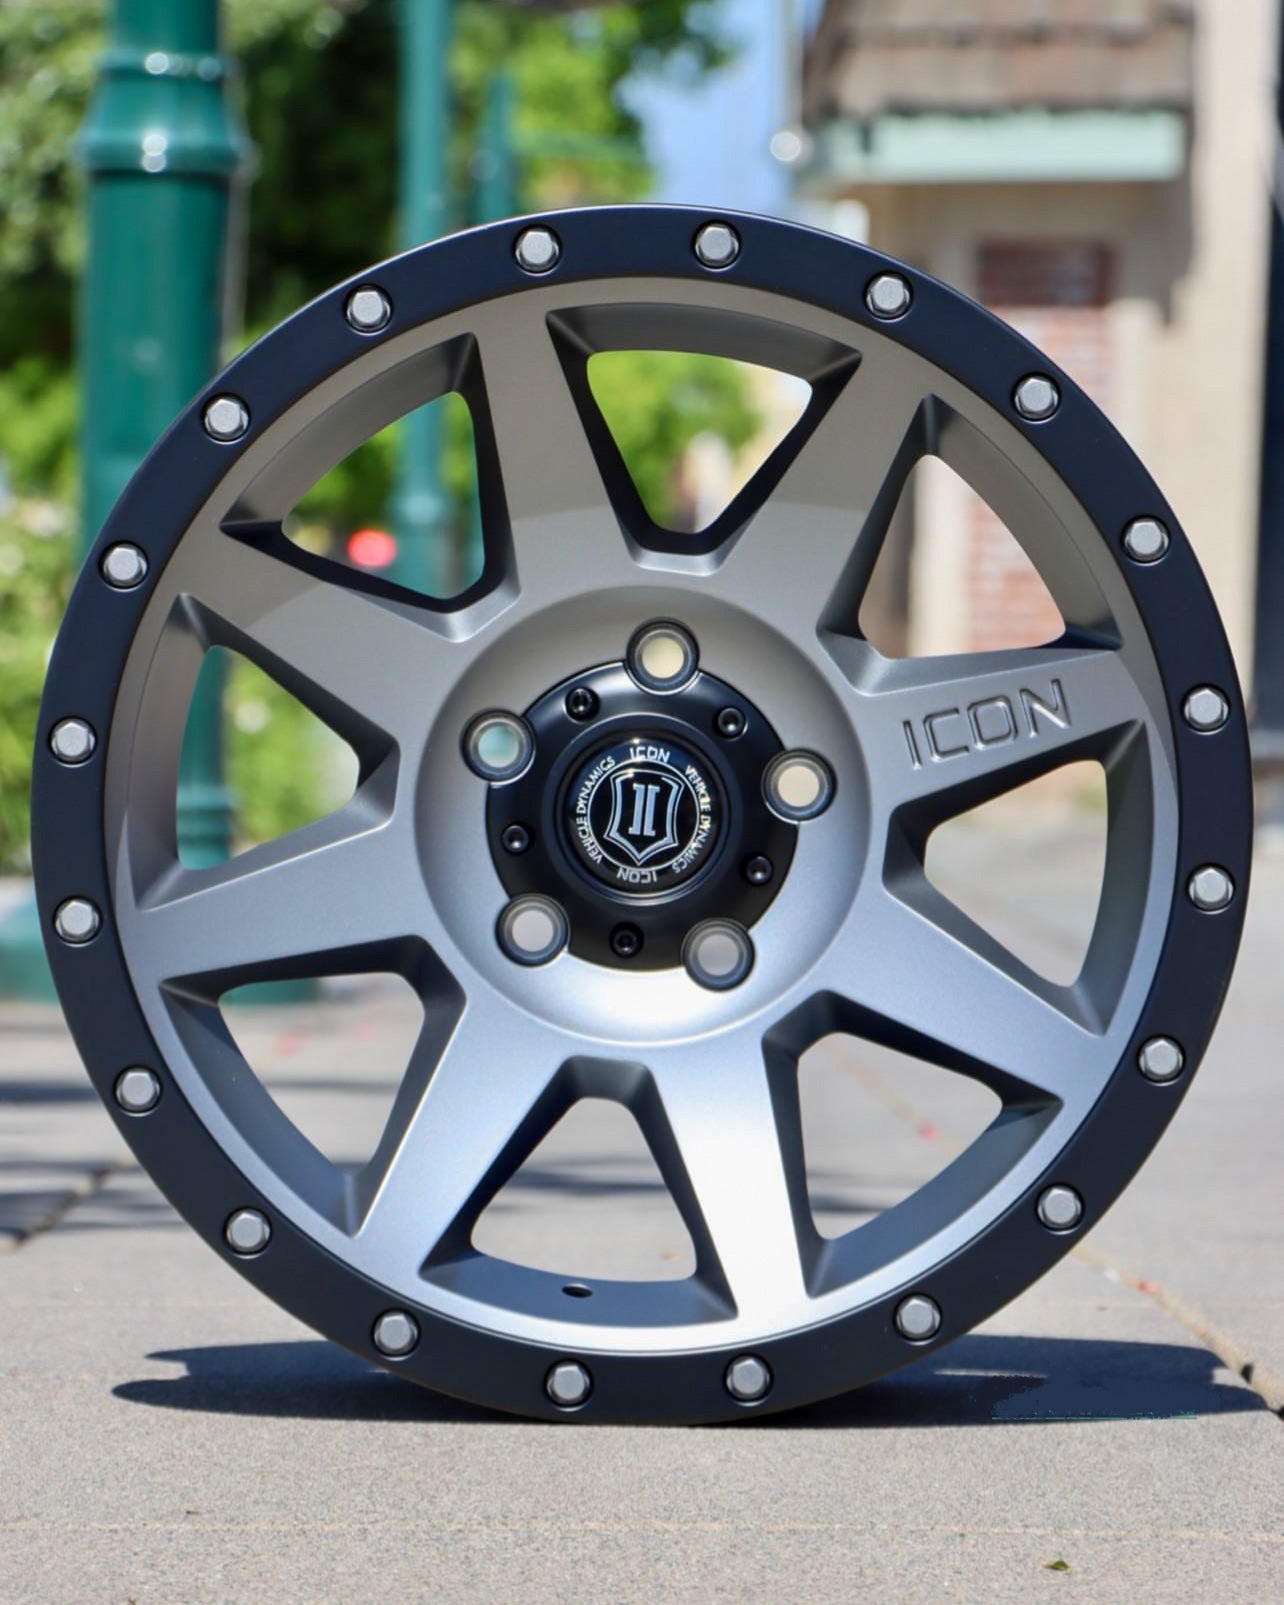 Icon Rebound wheel, in a silver/titanium finish, in the middle of the sidewalk